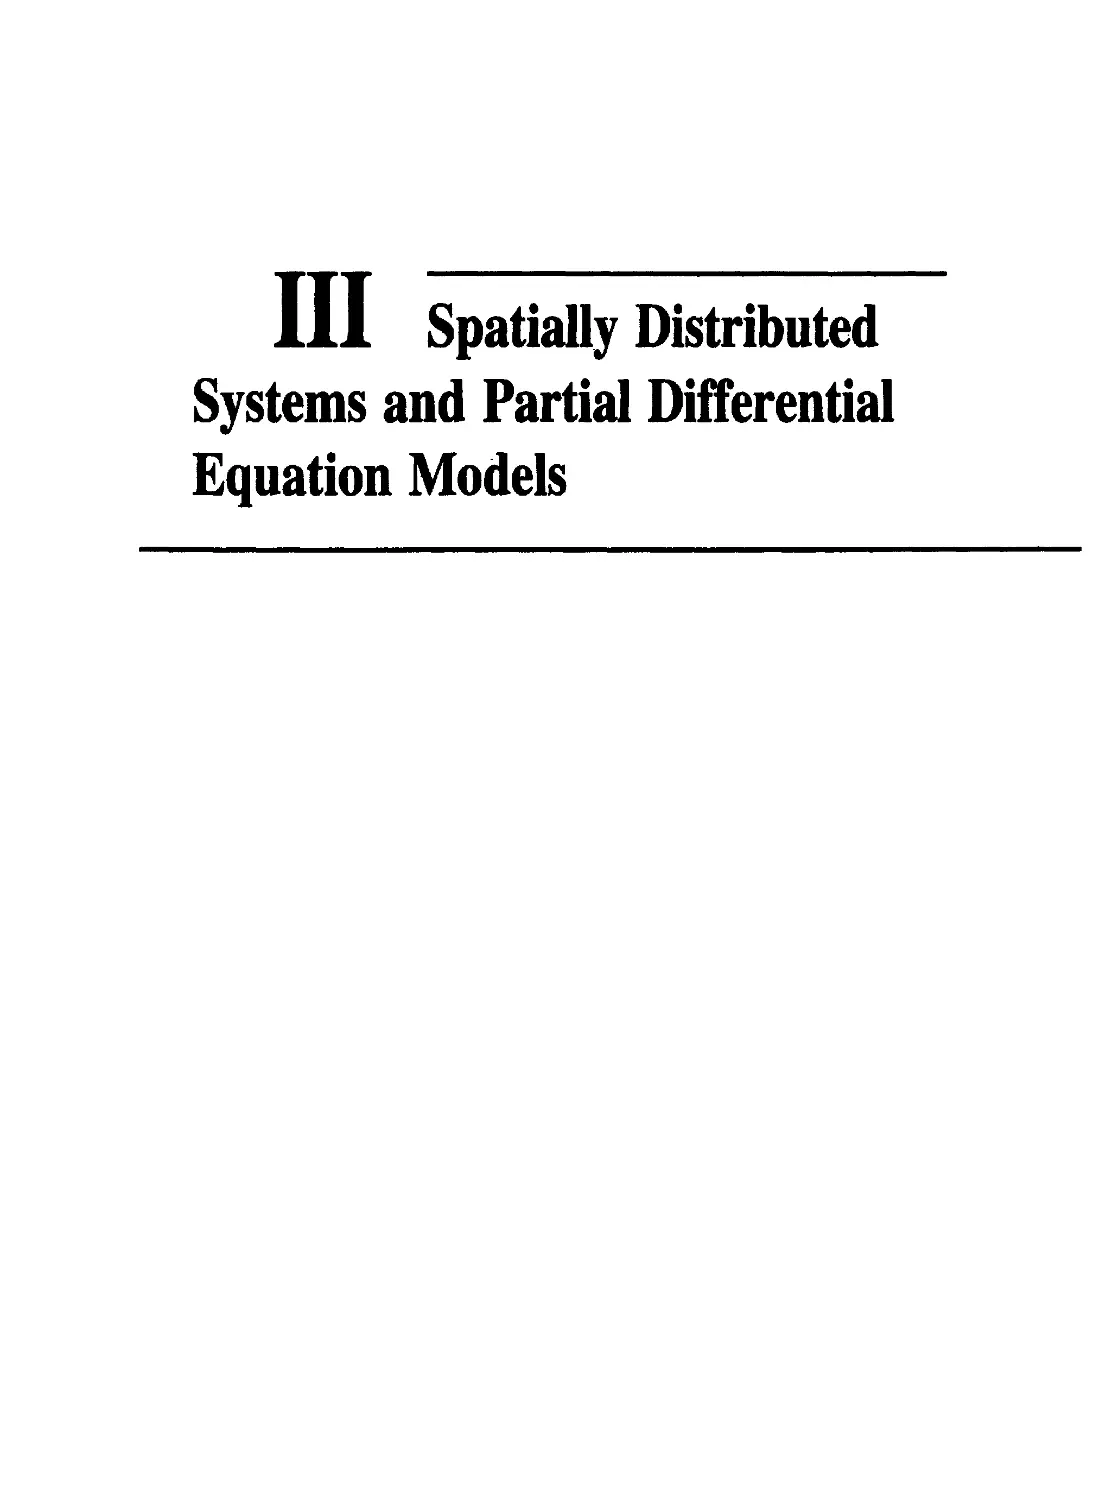 Part III Spatially Distributed Systems and Partial Differential Equation Models